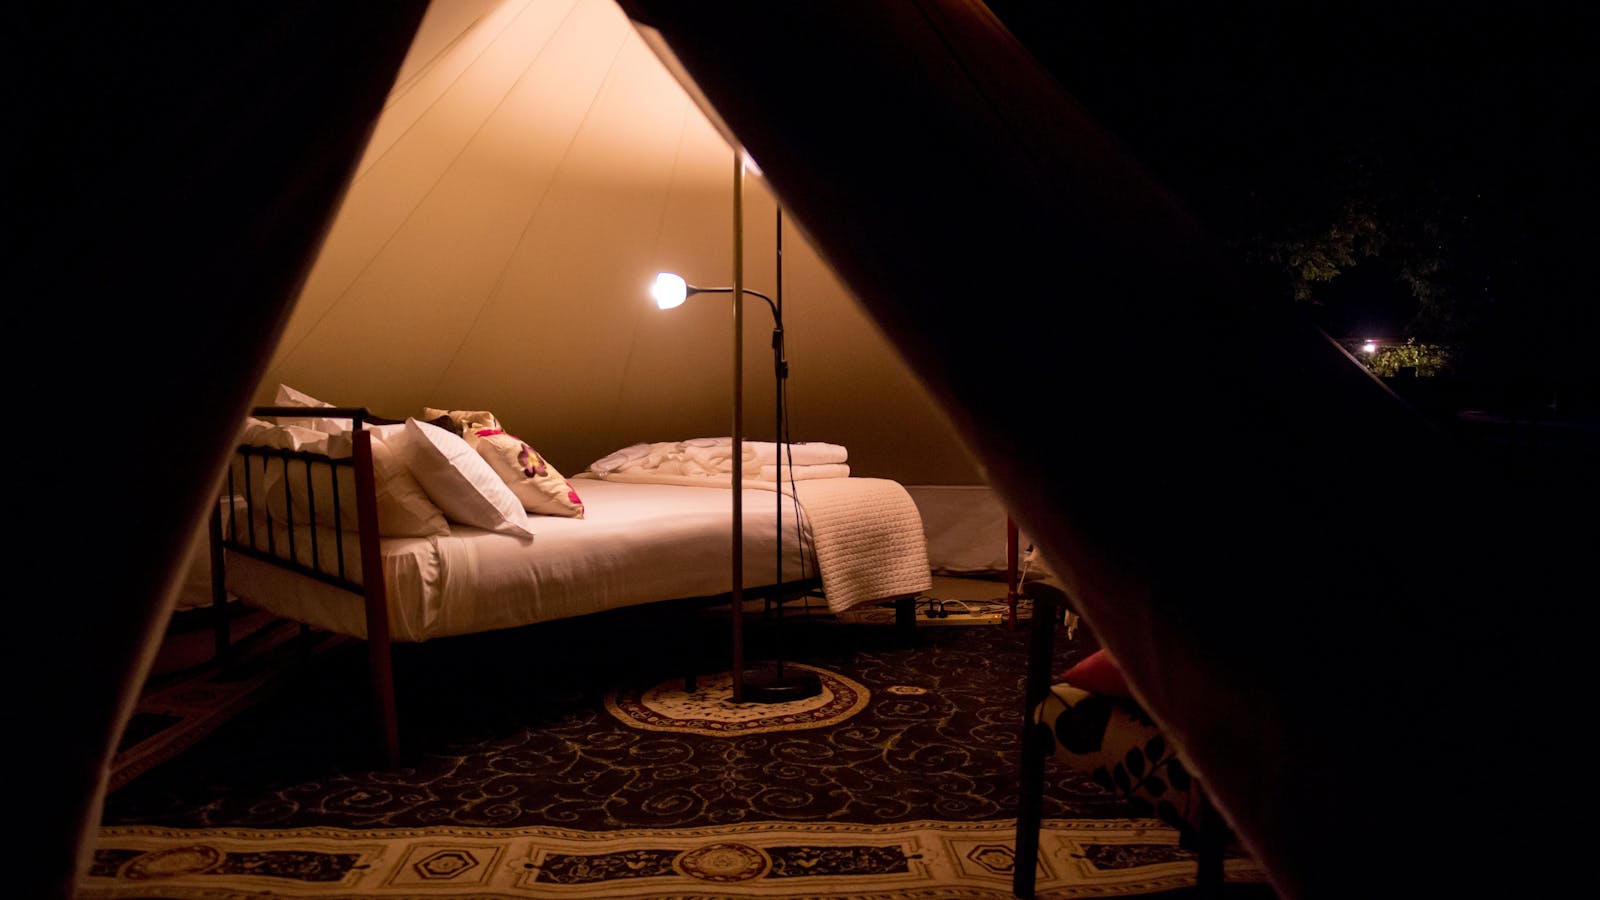 Club Boutique Hotel Cunnamulla accommodation offering Outback Glamping Tent experience with luxury